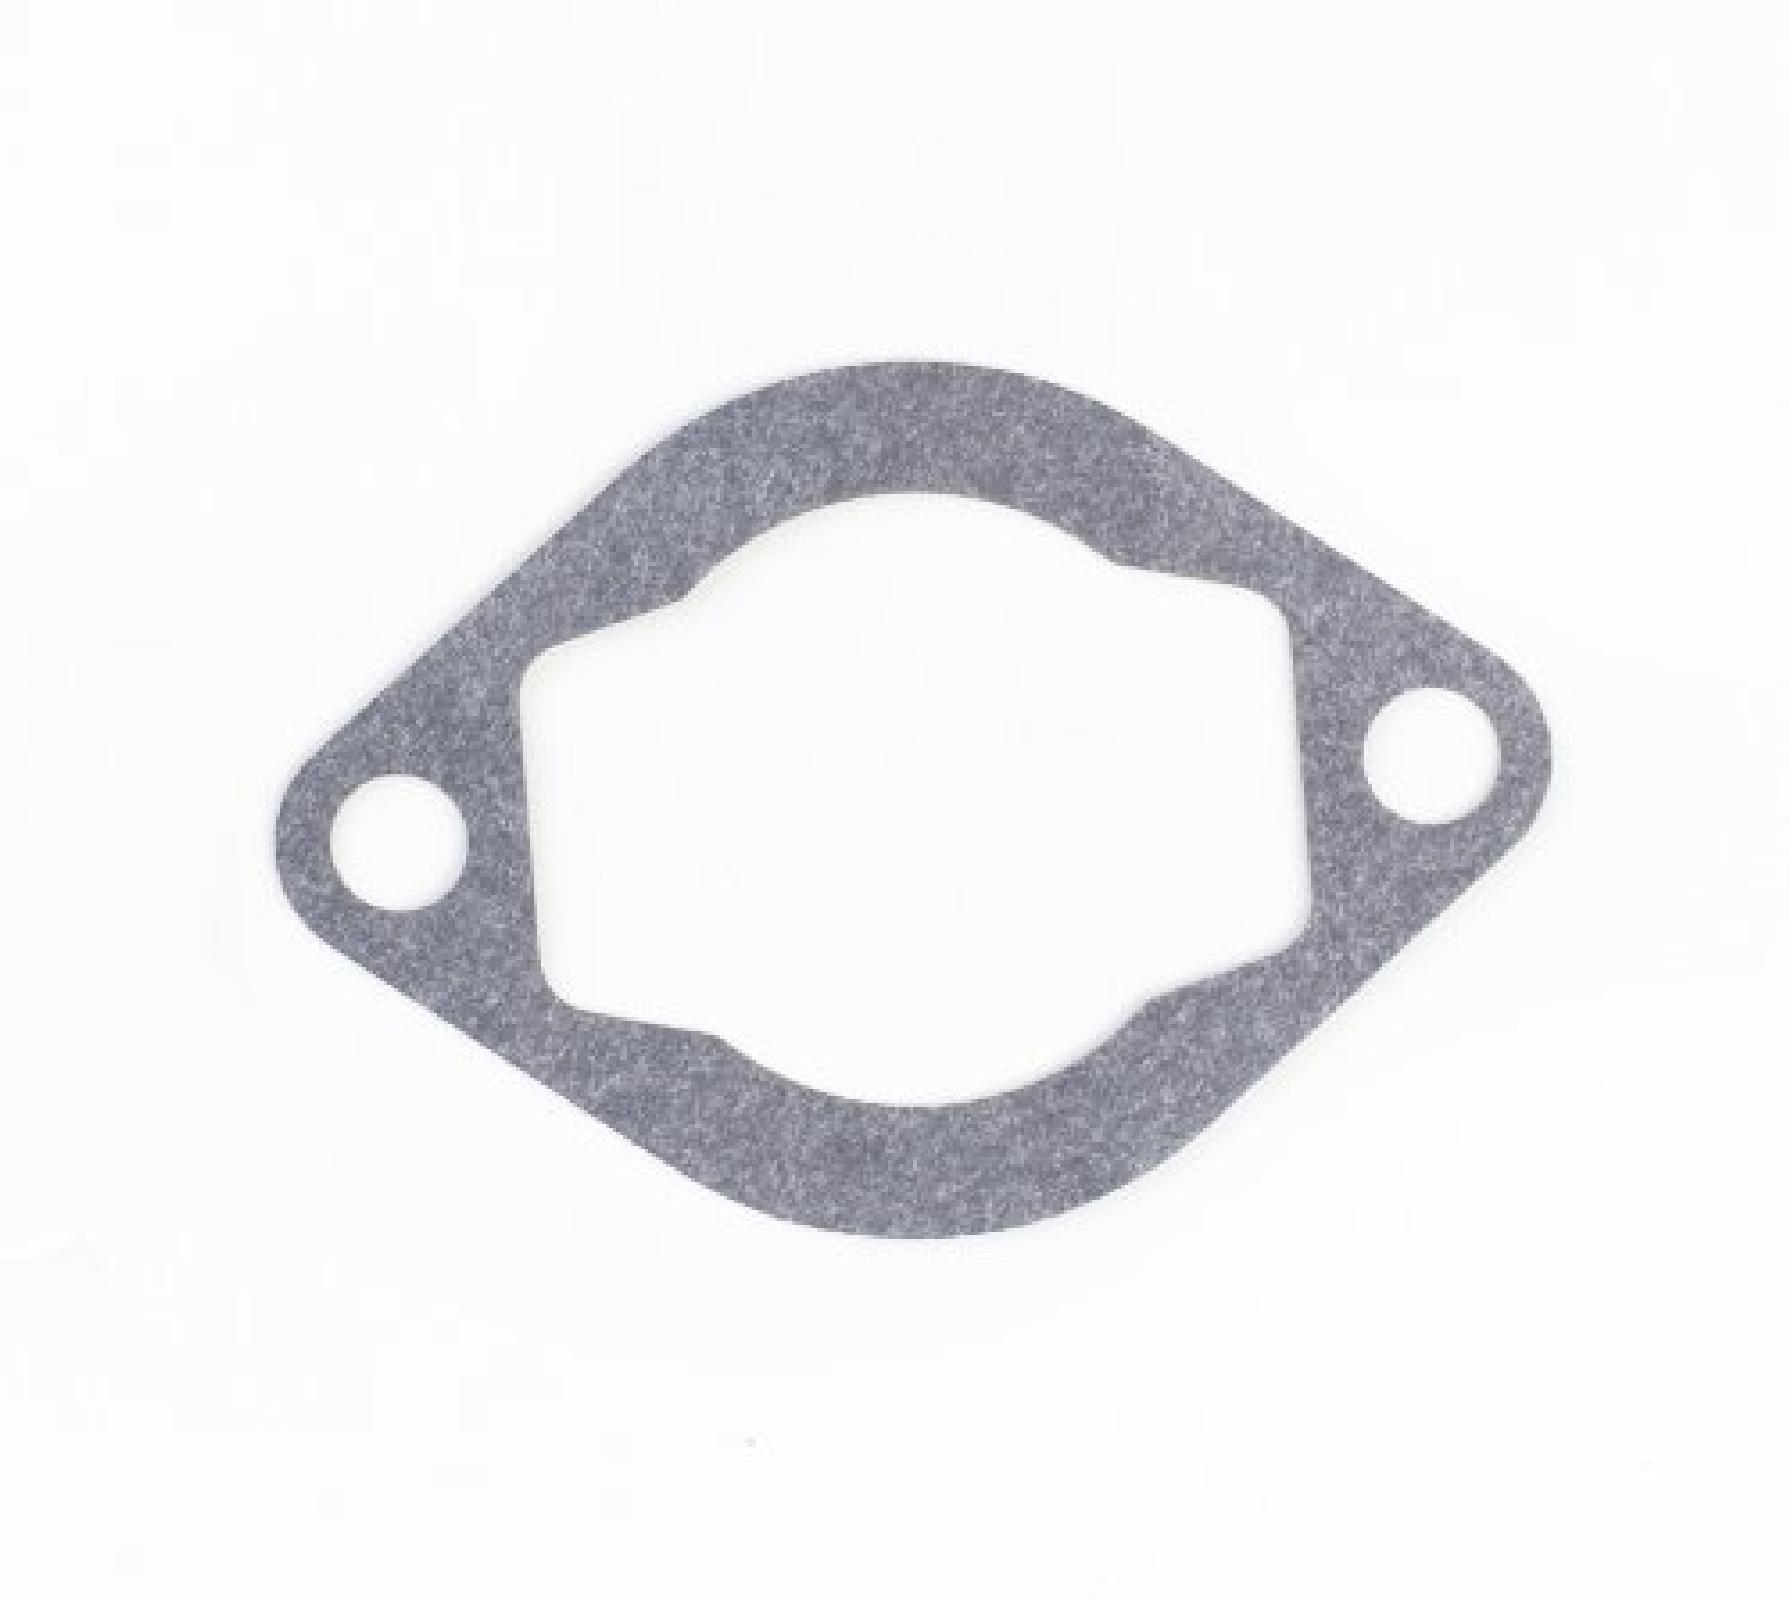 Briggs & Stratton Air Cleaner Gasket Replaces Old Briggs # 27310